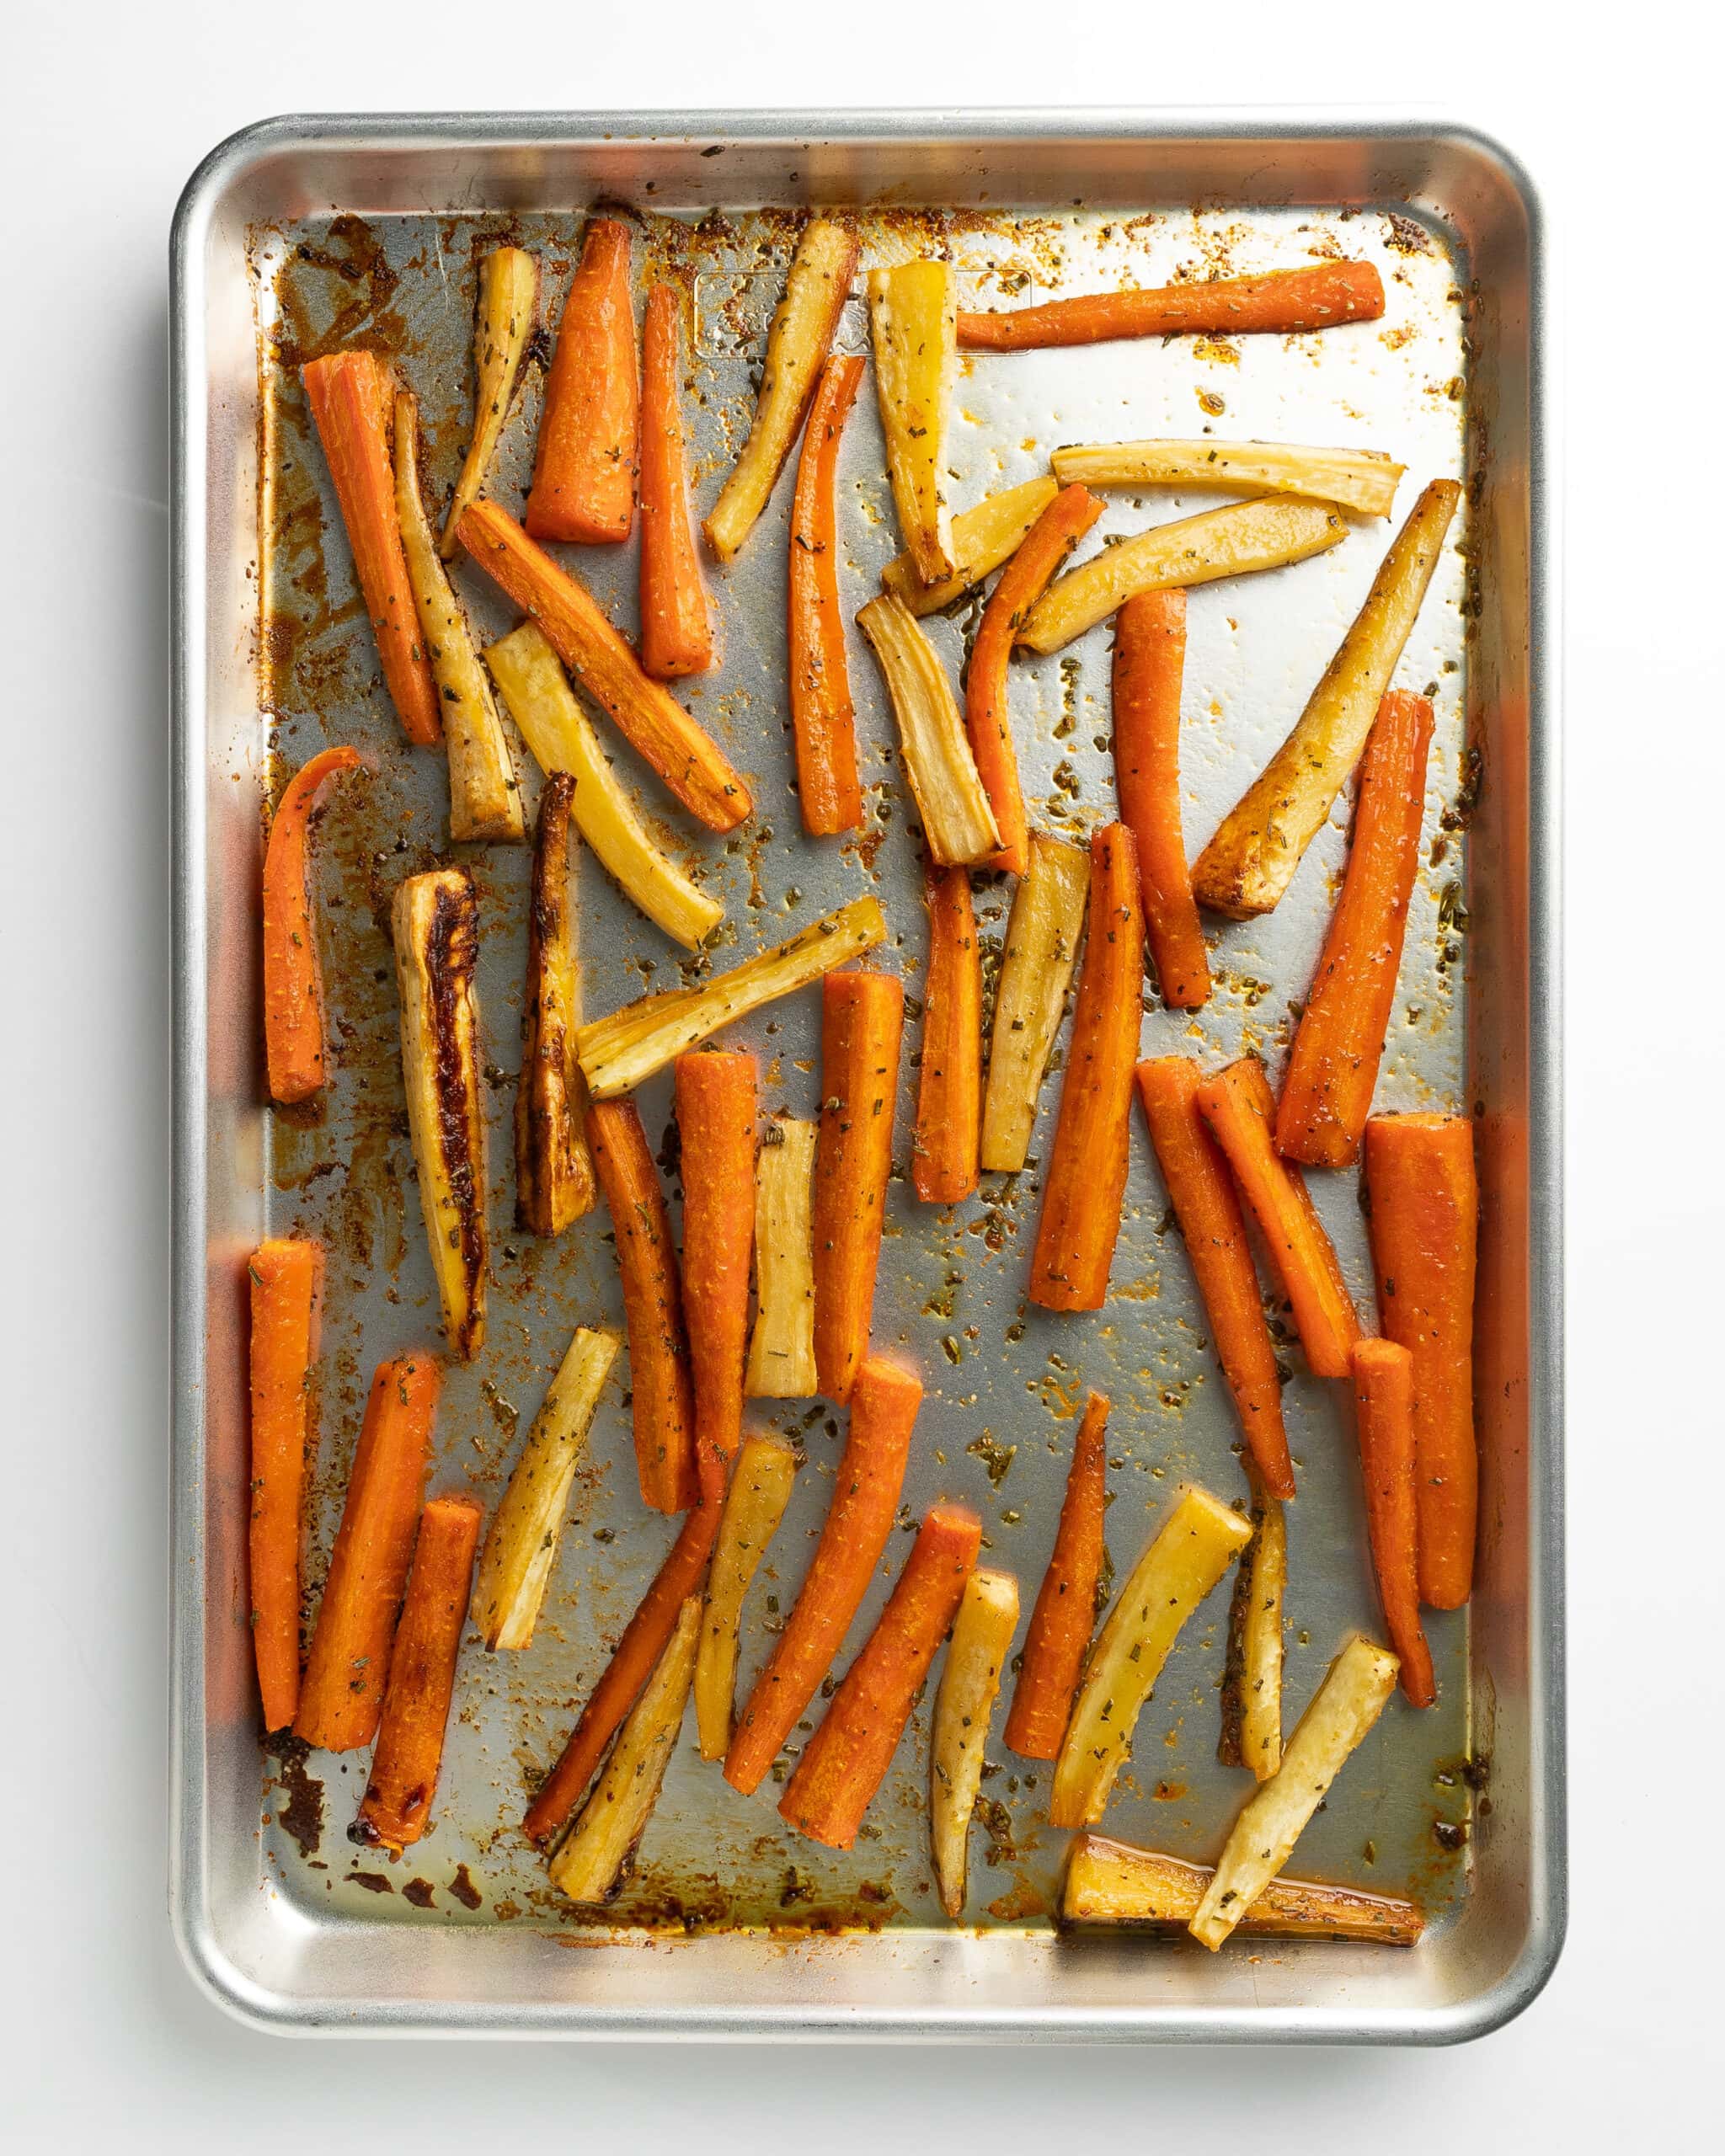 A large baking sheet with roasted carrots and parsnips, carmelized to perfection. 